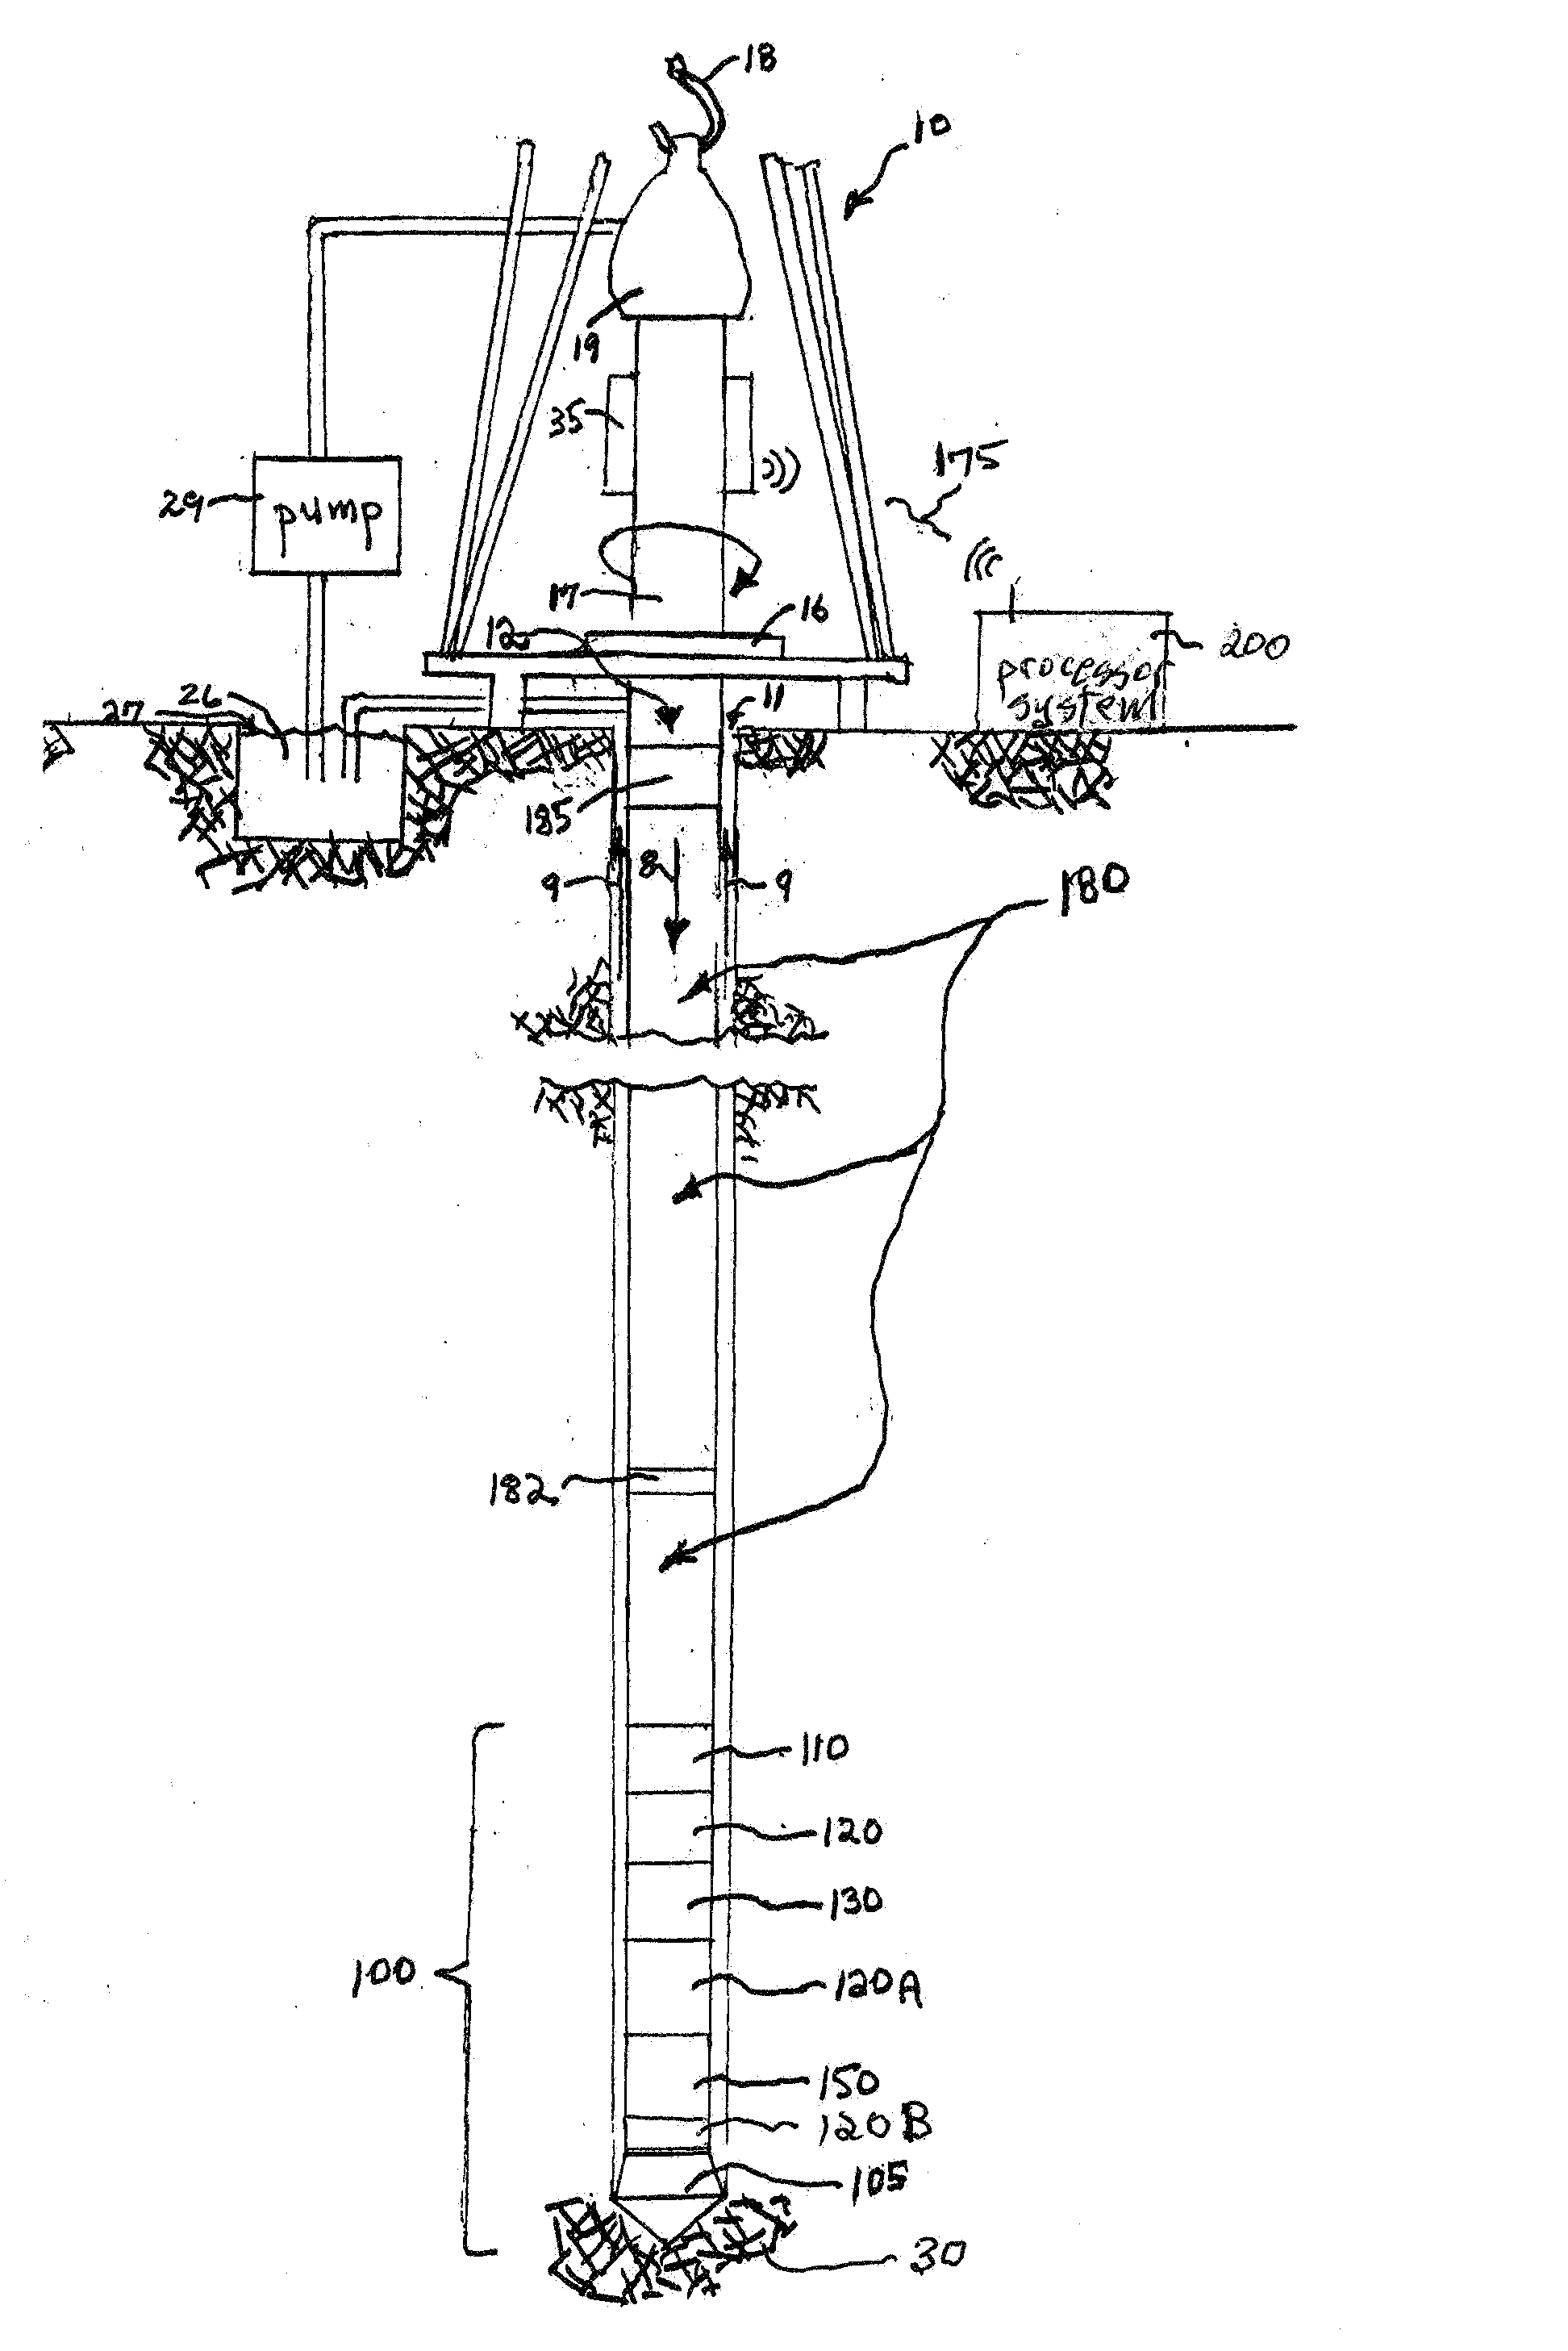 Methods For Characterization Of Formations, Navigating Drill Paths, And Placing Wells In Earth Boreholes